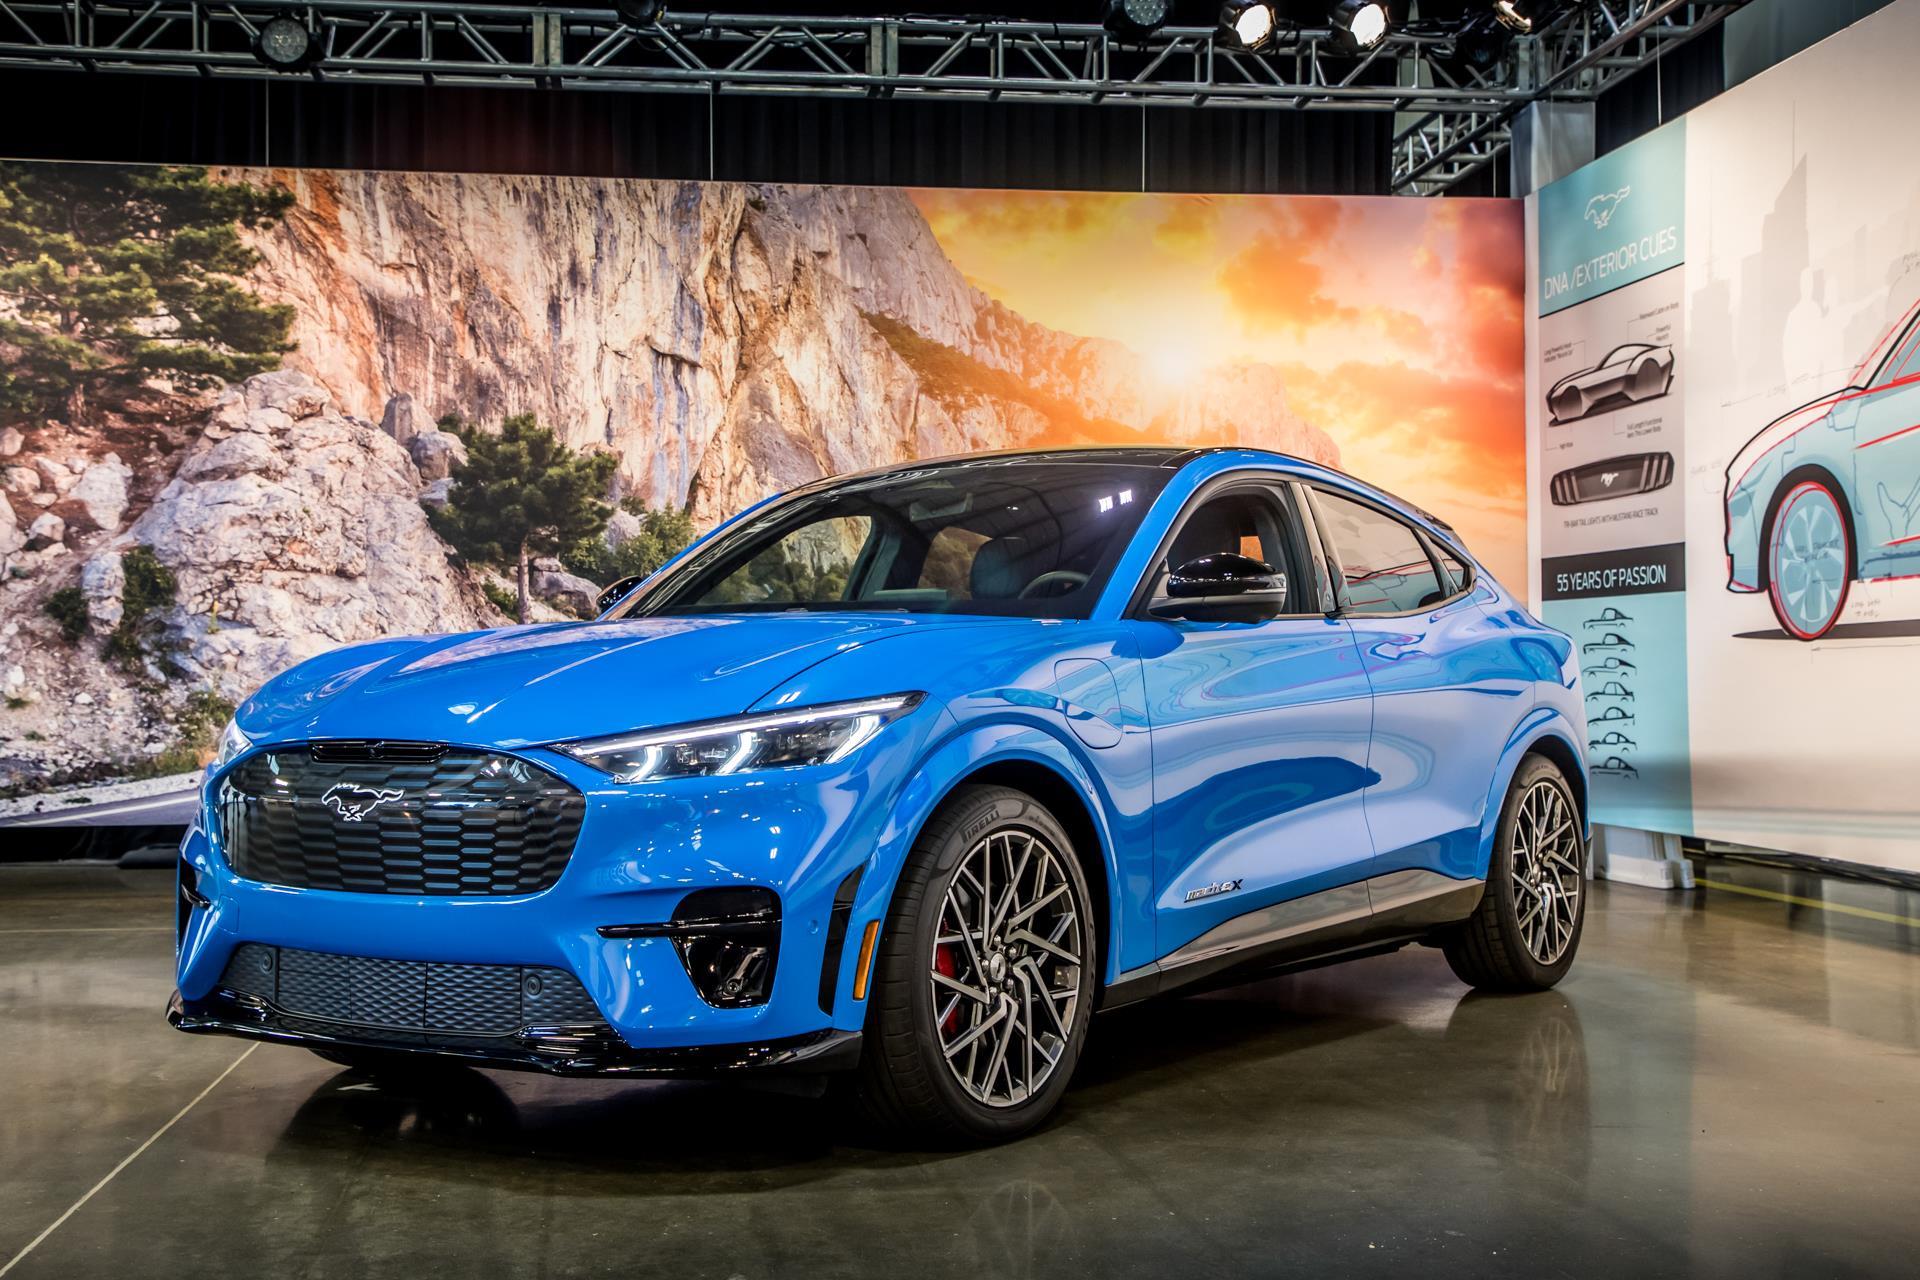 ford-unveils-the-electric-mustang-mach-e-suv-article-car-design-news